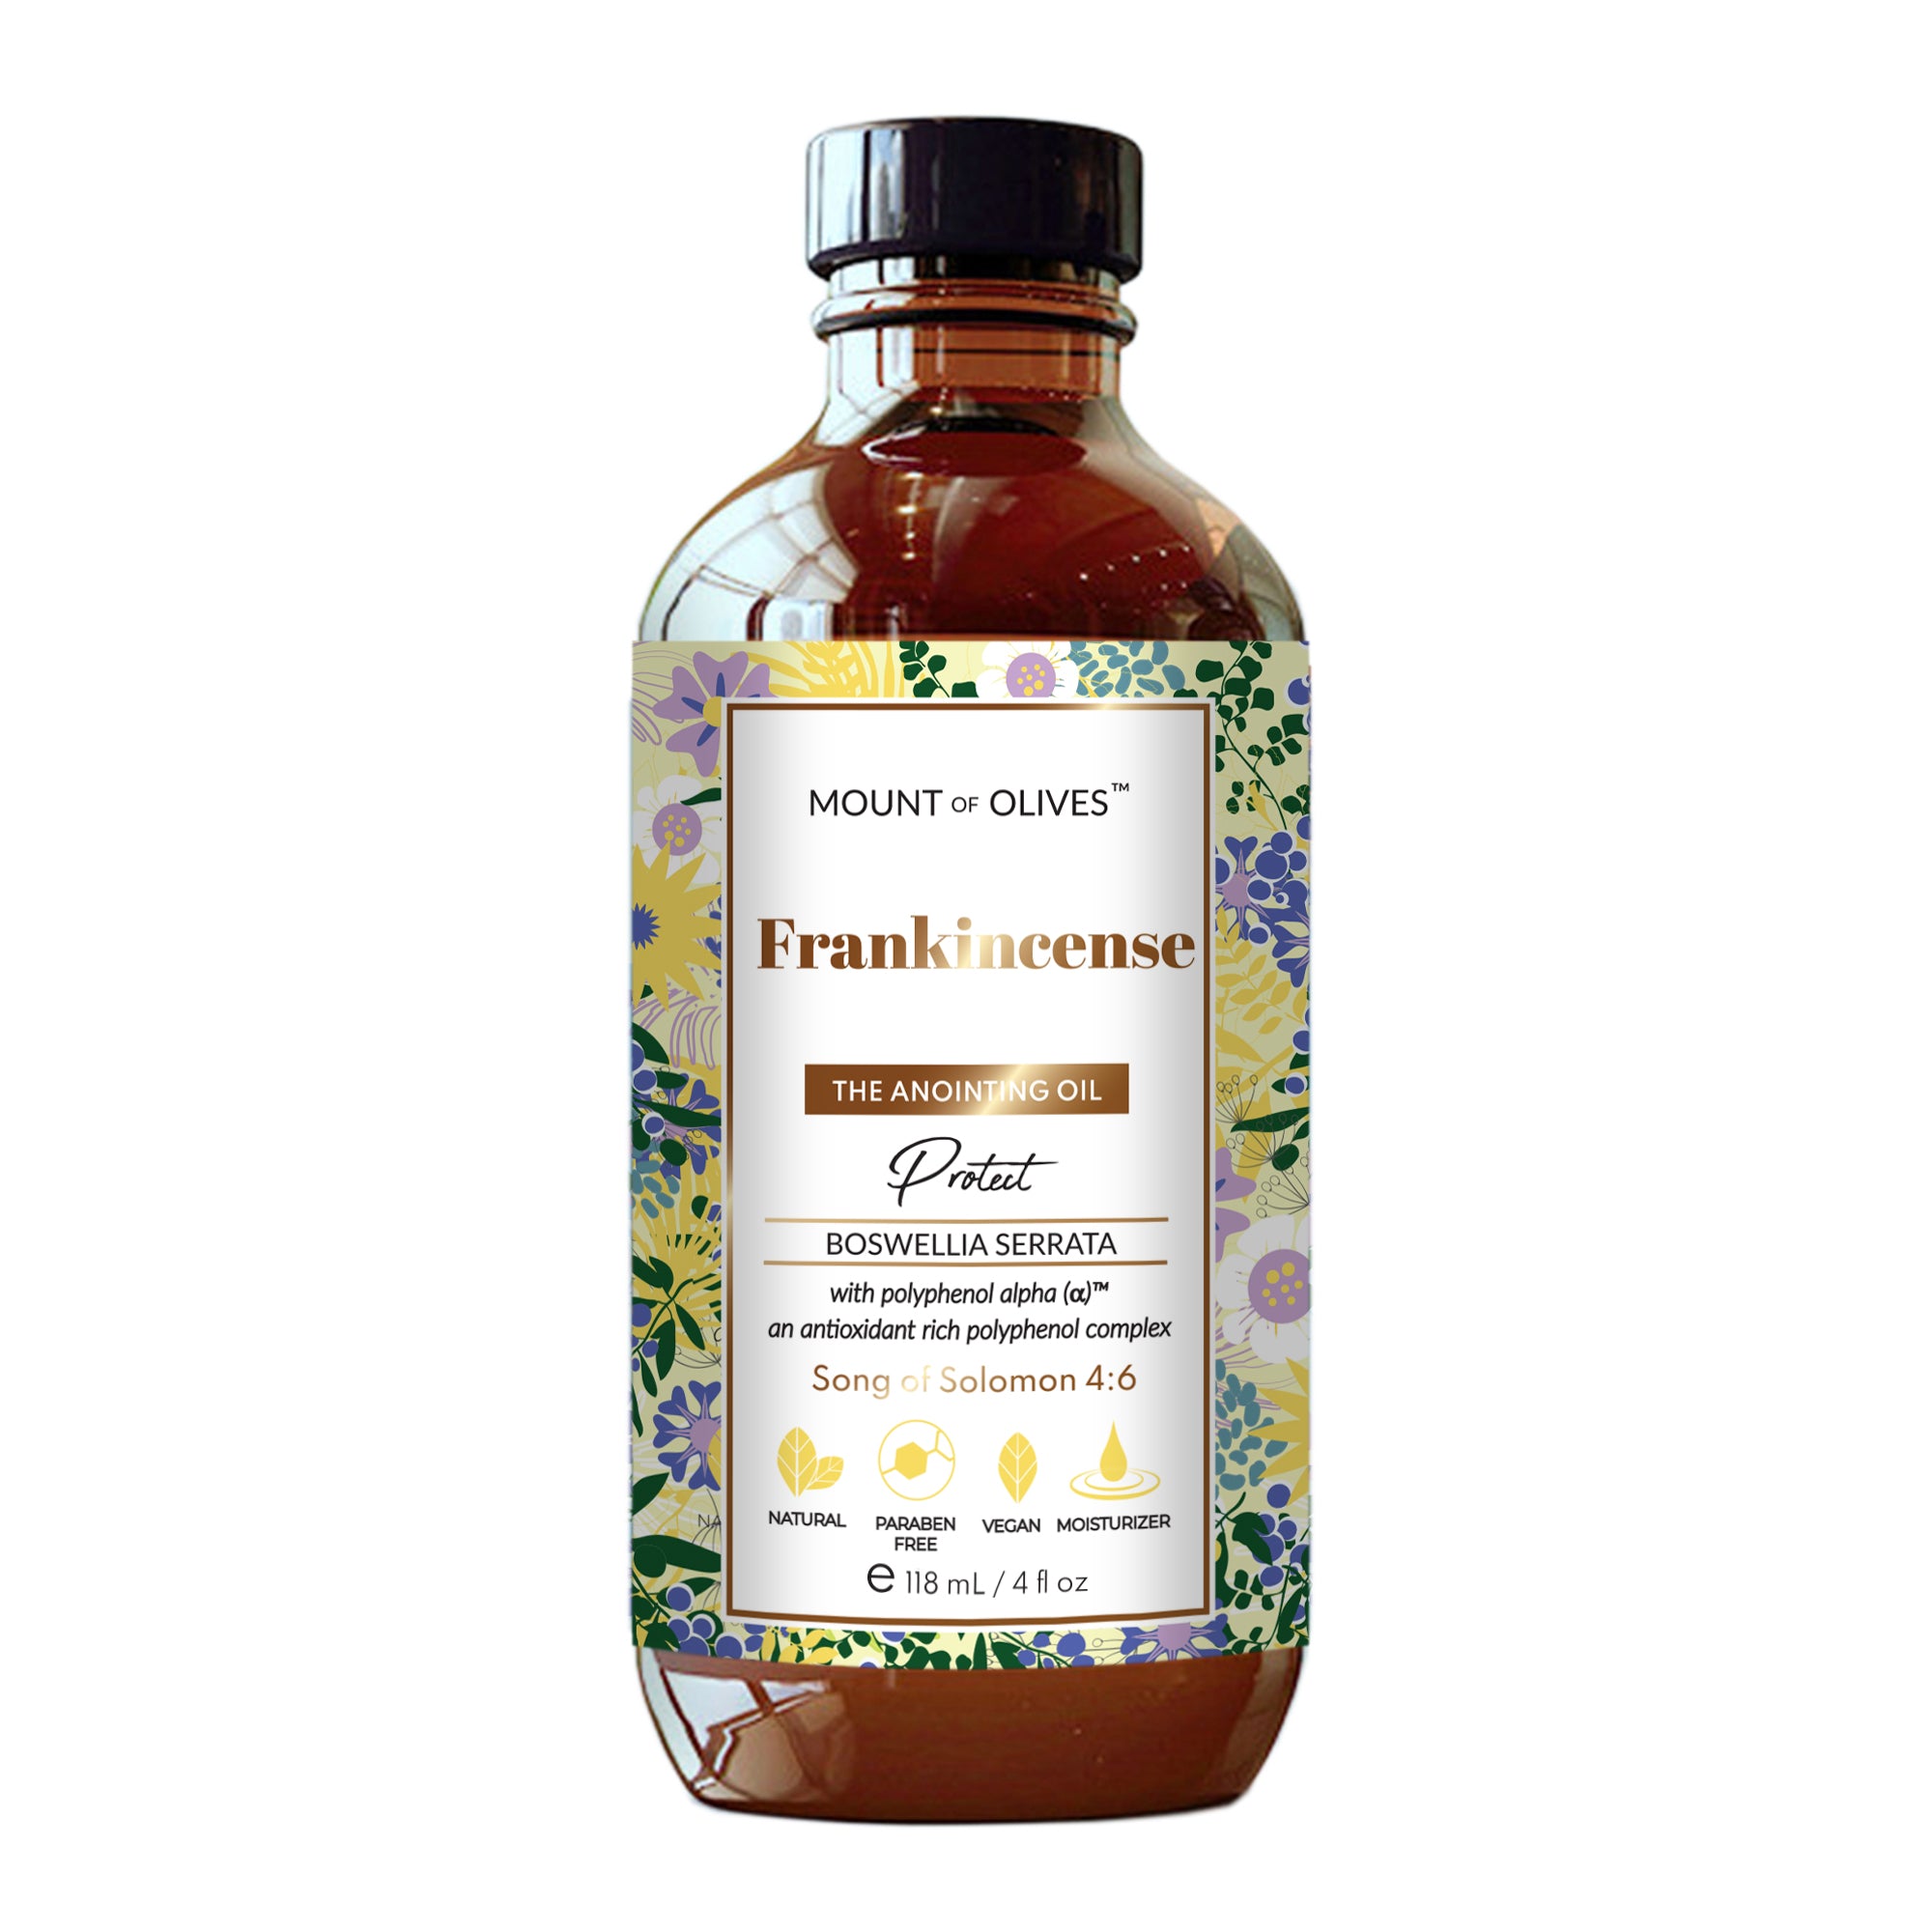 Frankincense Anointing Oil With Cosmeceuticals Derived from Biblical Botanicals